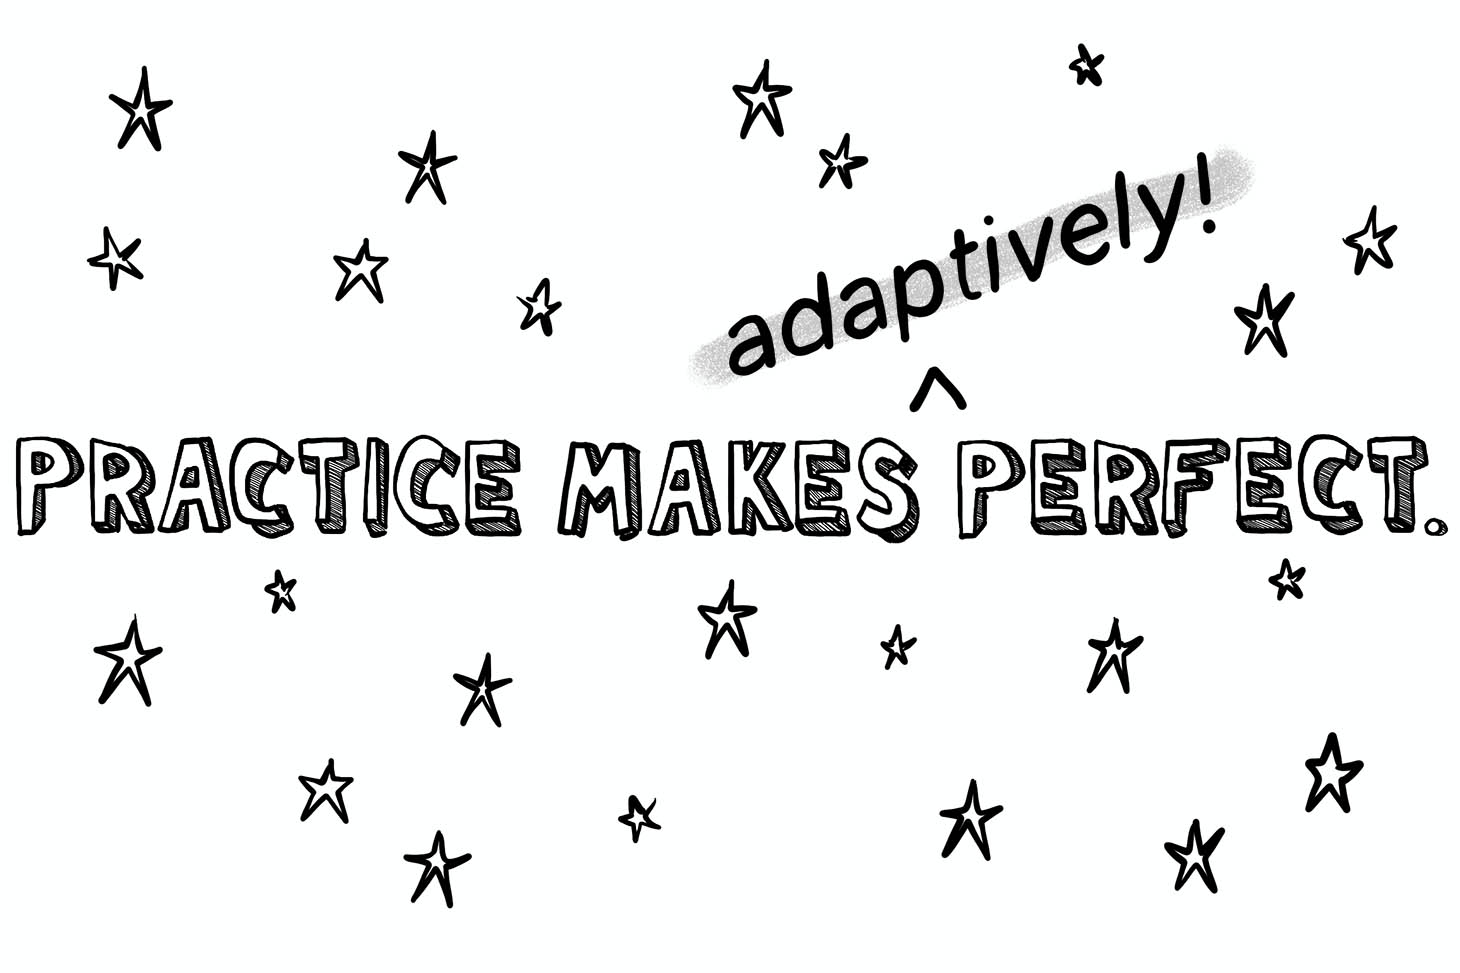 'Practice makes perfect' sign with 'adaptively' slipped in before 'perfect'